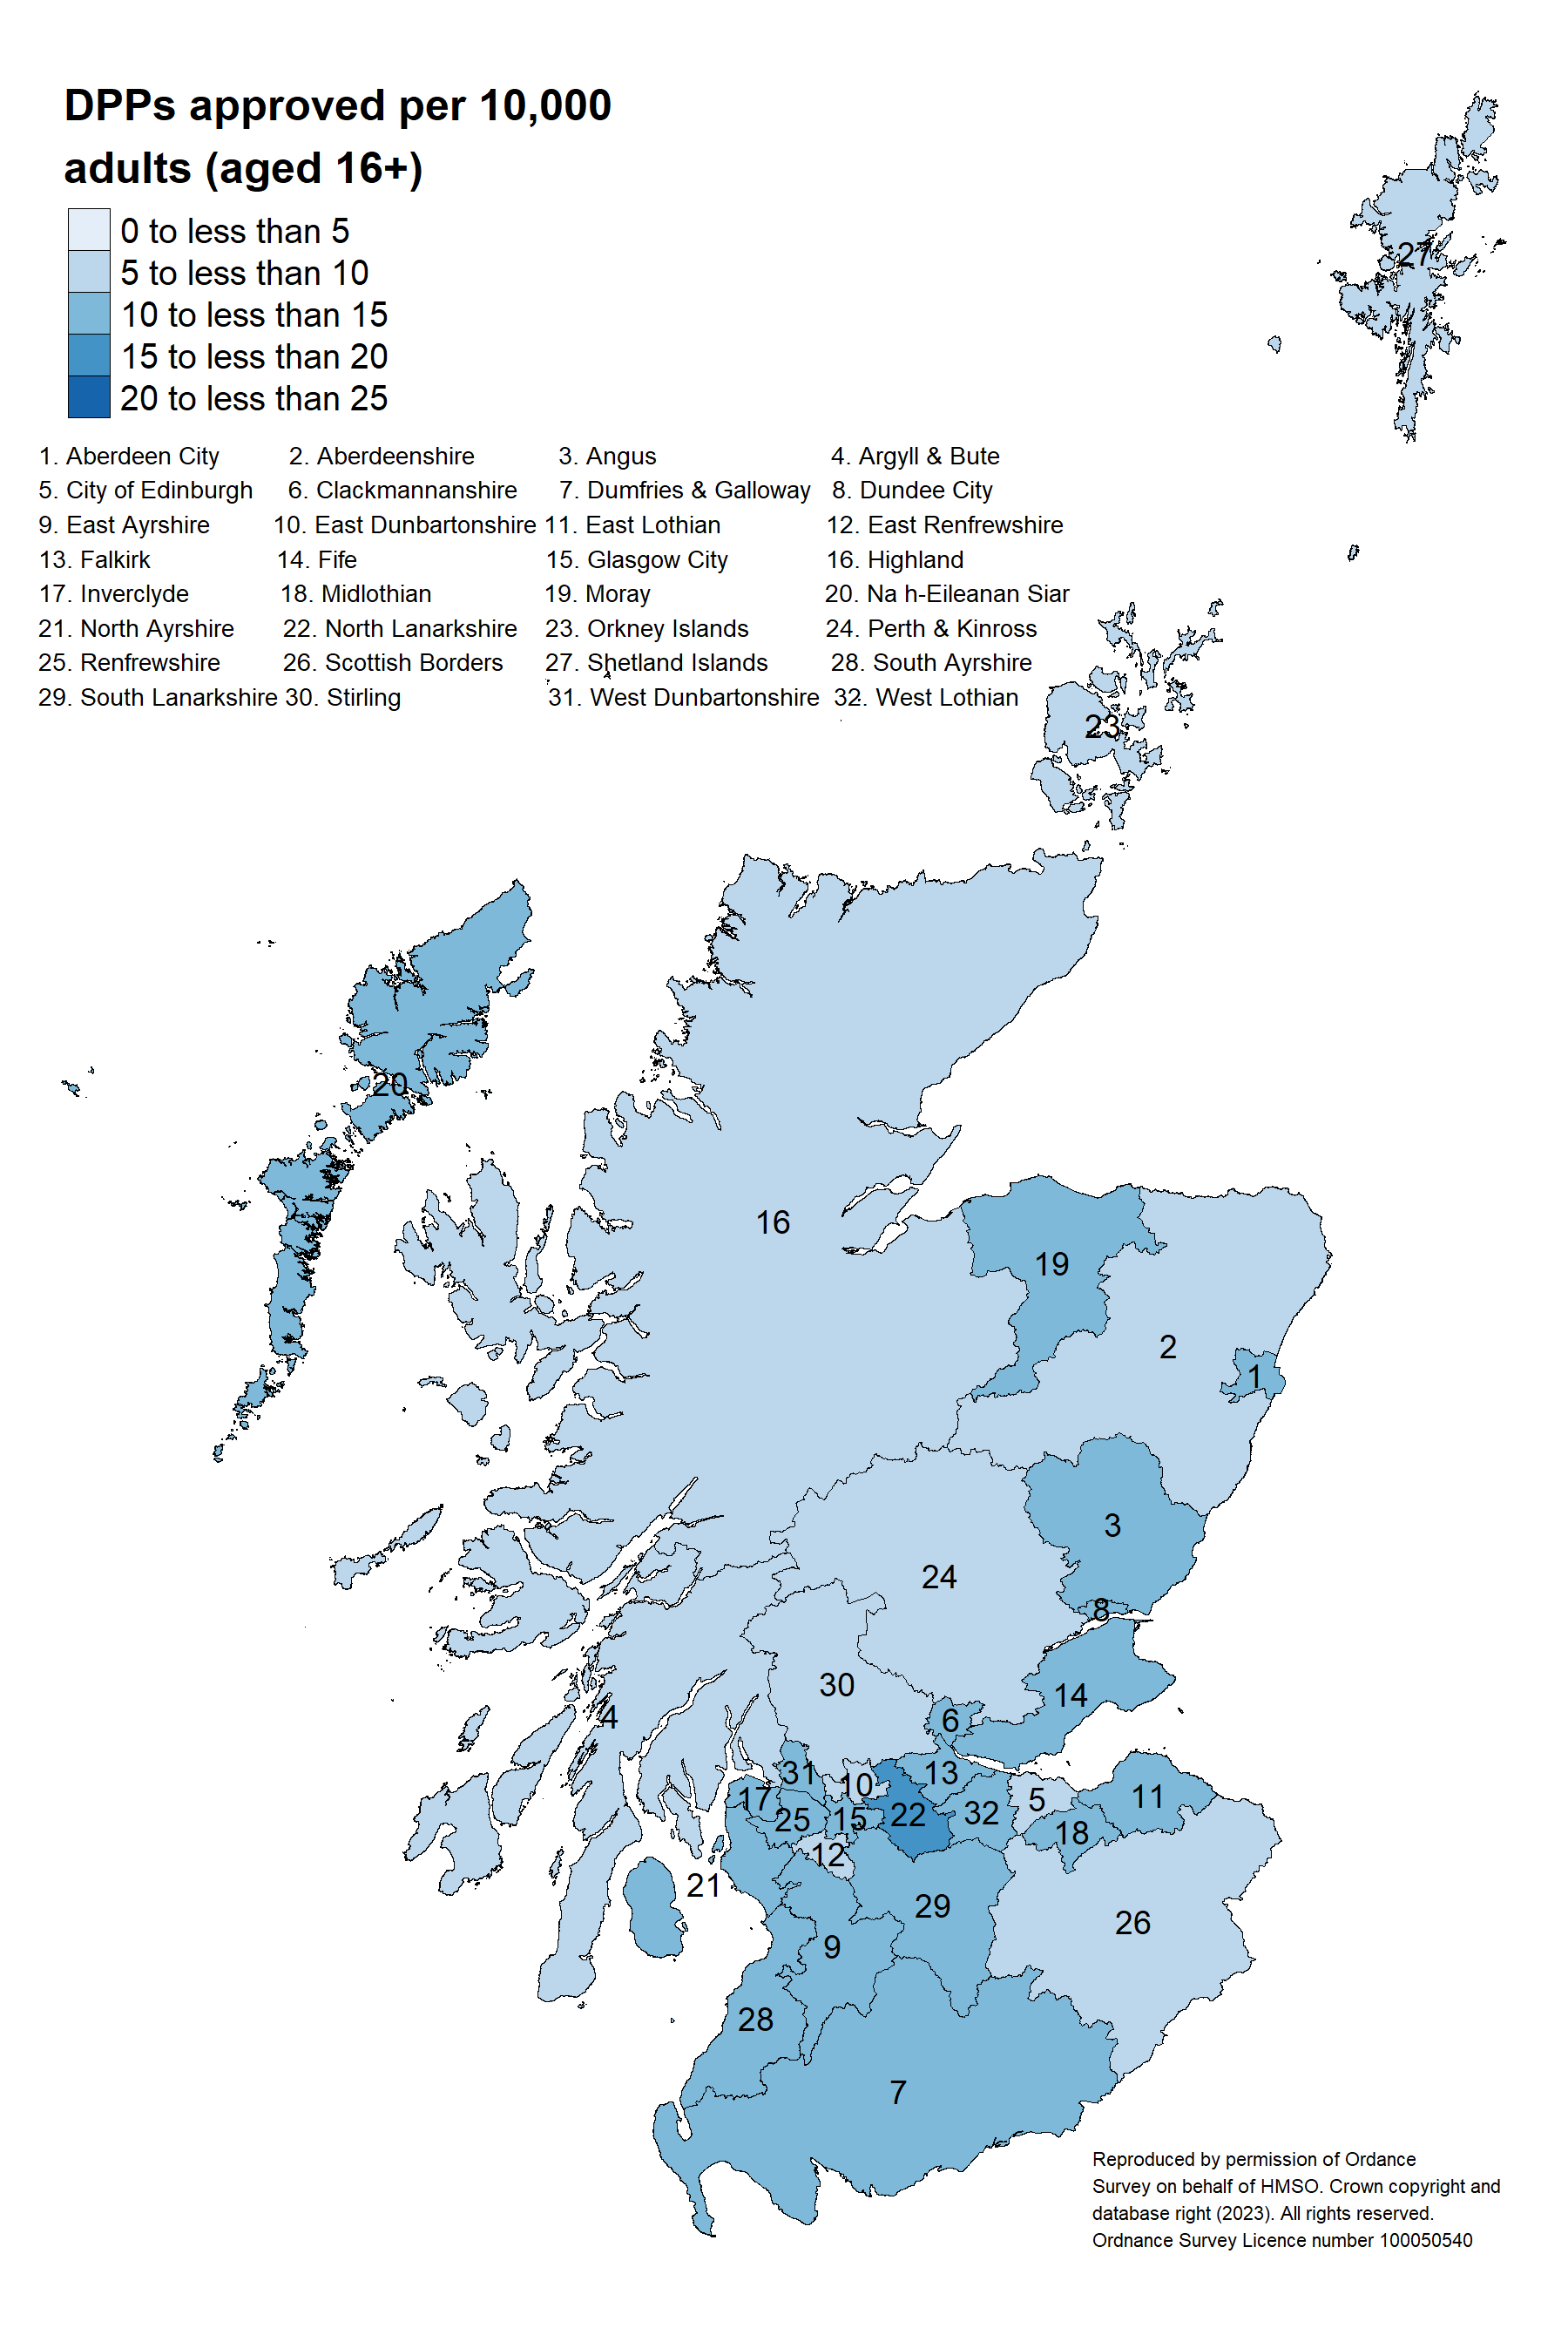 Heat Map 3 shows the DAS DPP rates in each local authority in 2022-23 by grouping intervals of 5. This heat map shows that North Lanarkshire is in one of the highest groupings.